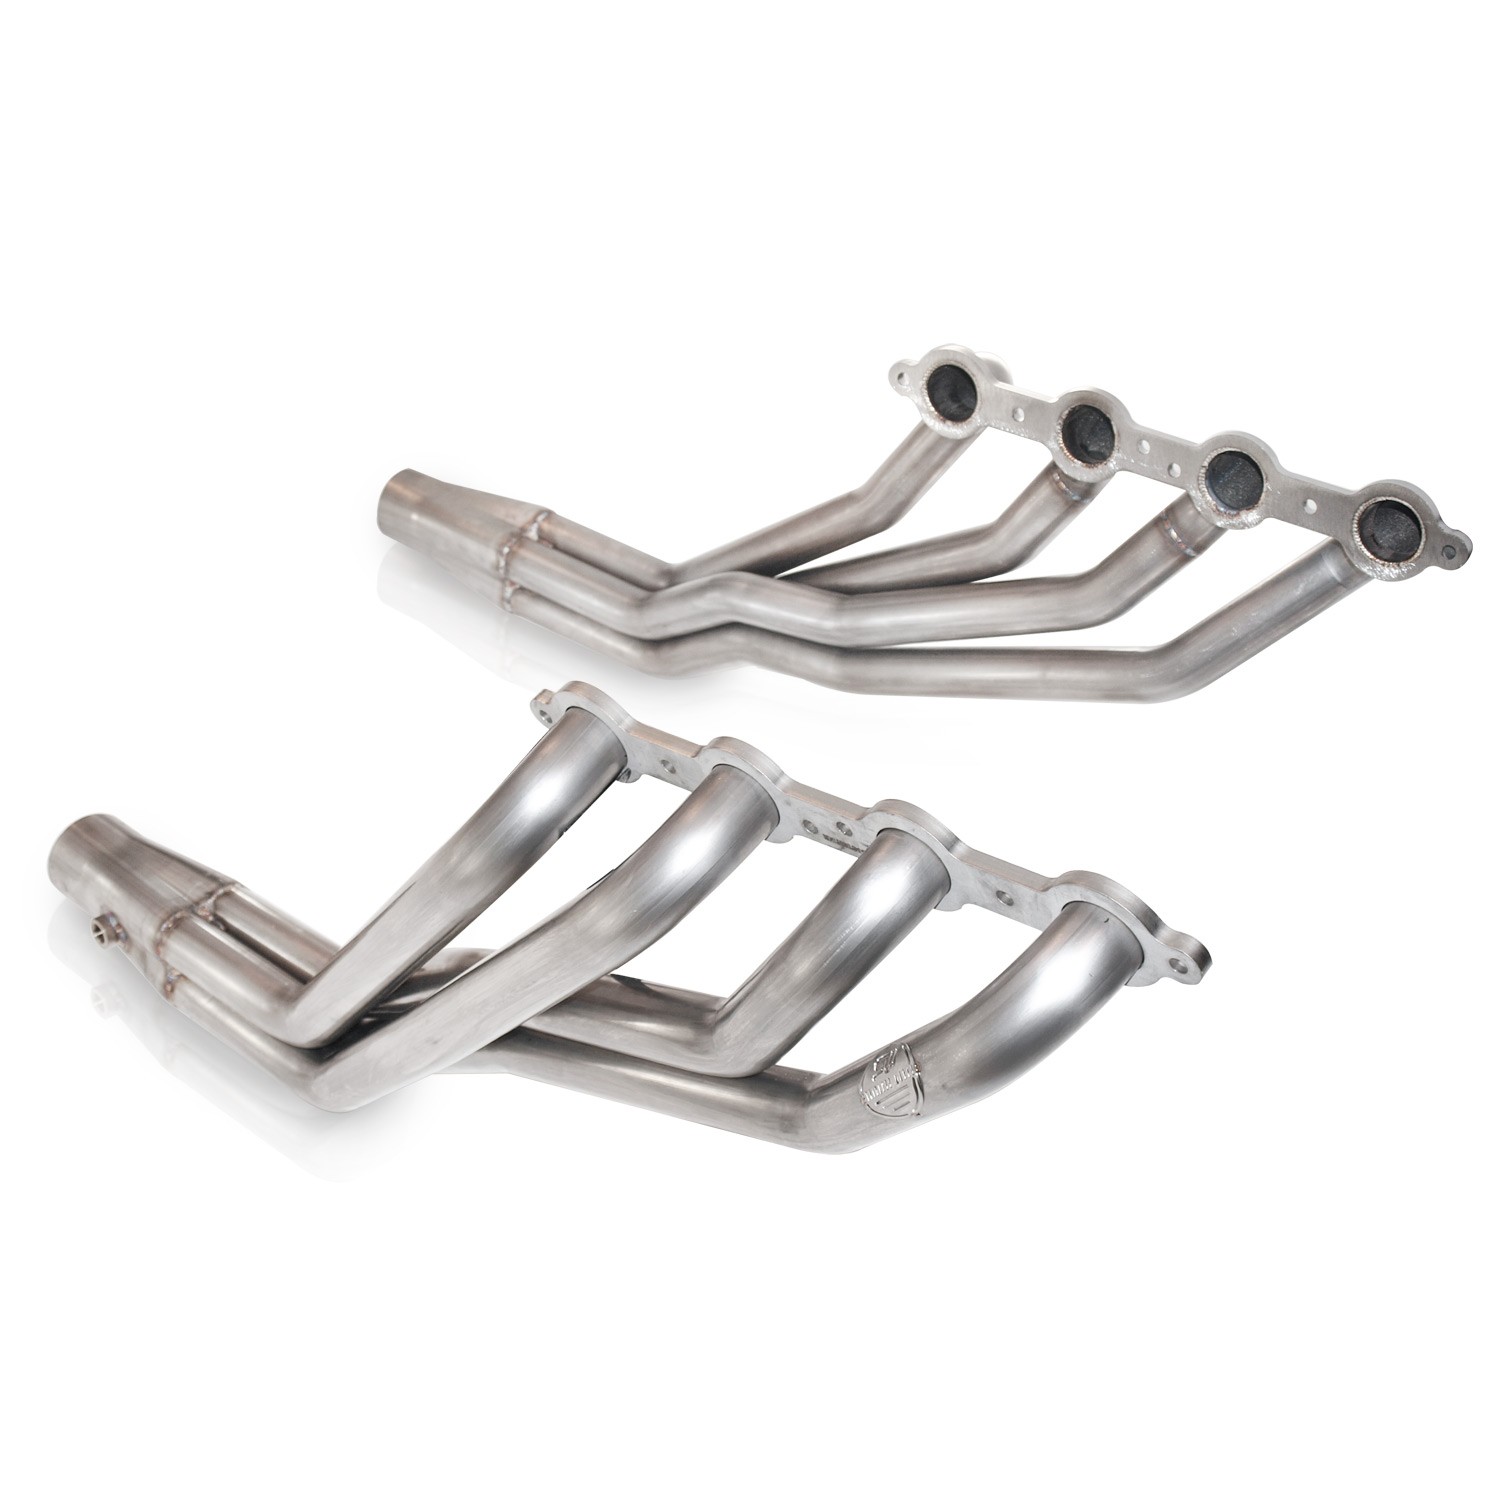 1967-1969 Camaro LS1, 1967-1969 Firebird LS1 SW Headers Only 1-3/4" For Wayne Due Subframe Performance Connect